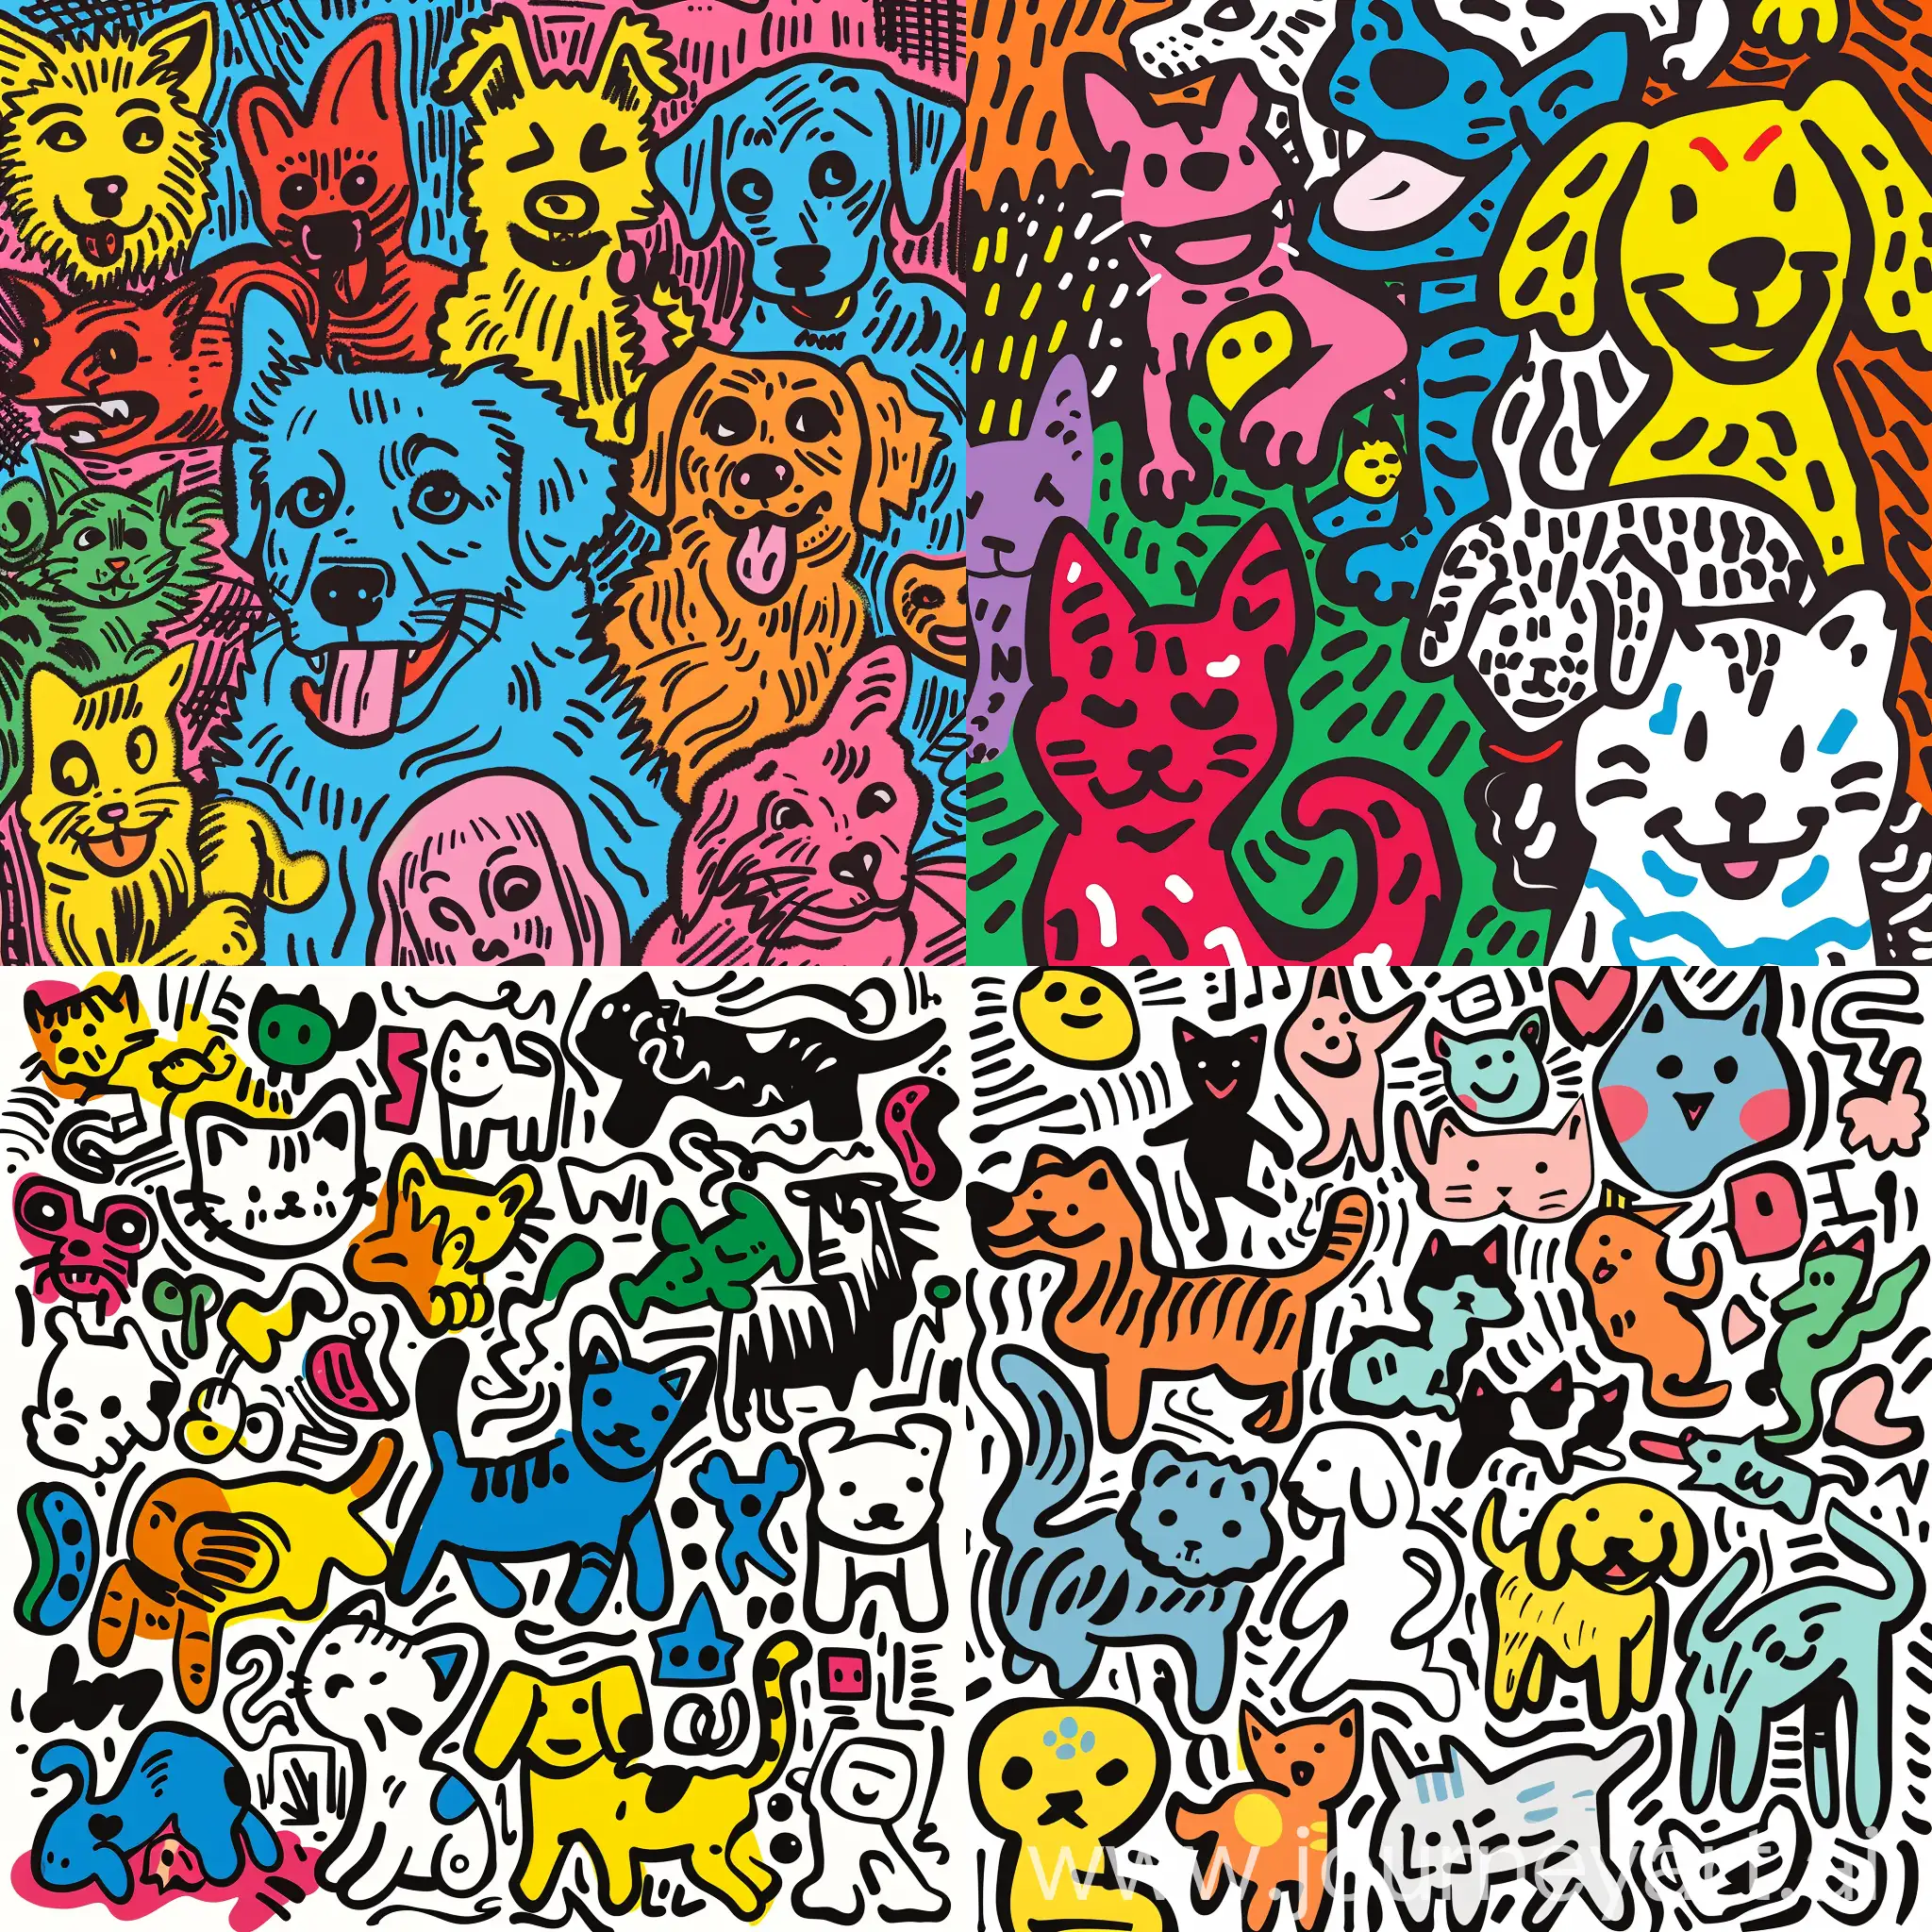 doodle in the style of Keith Haring
sharpie illustration
solid colors
in the style of grunge beauty
mixed patterns
text and emoji installations
Campus stray cats and dogs